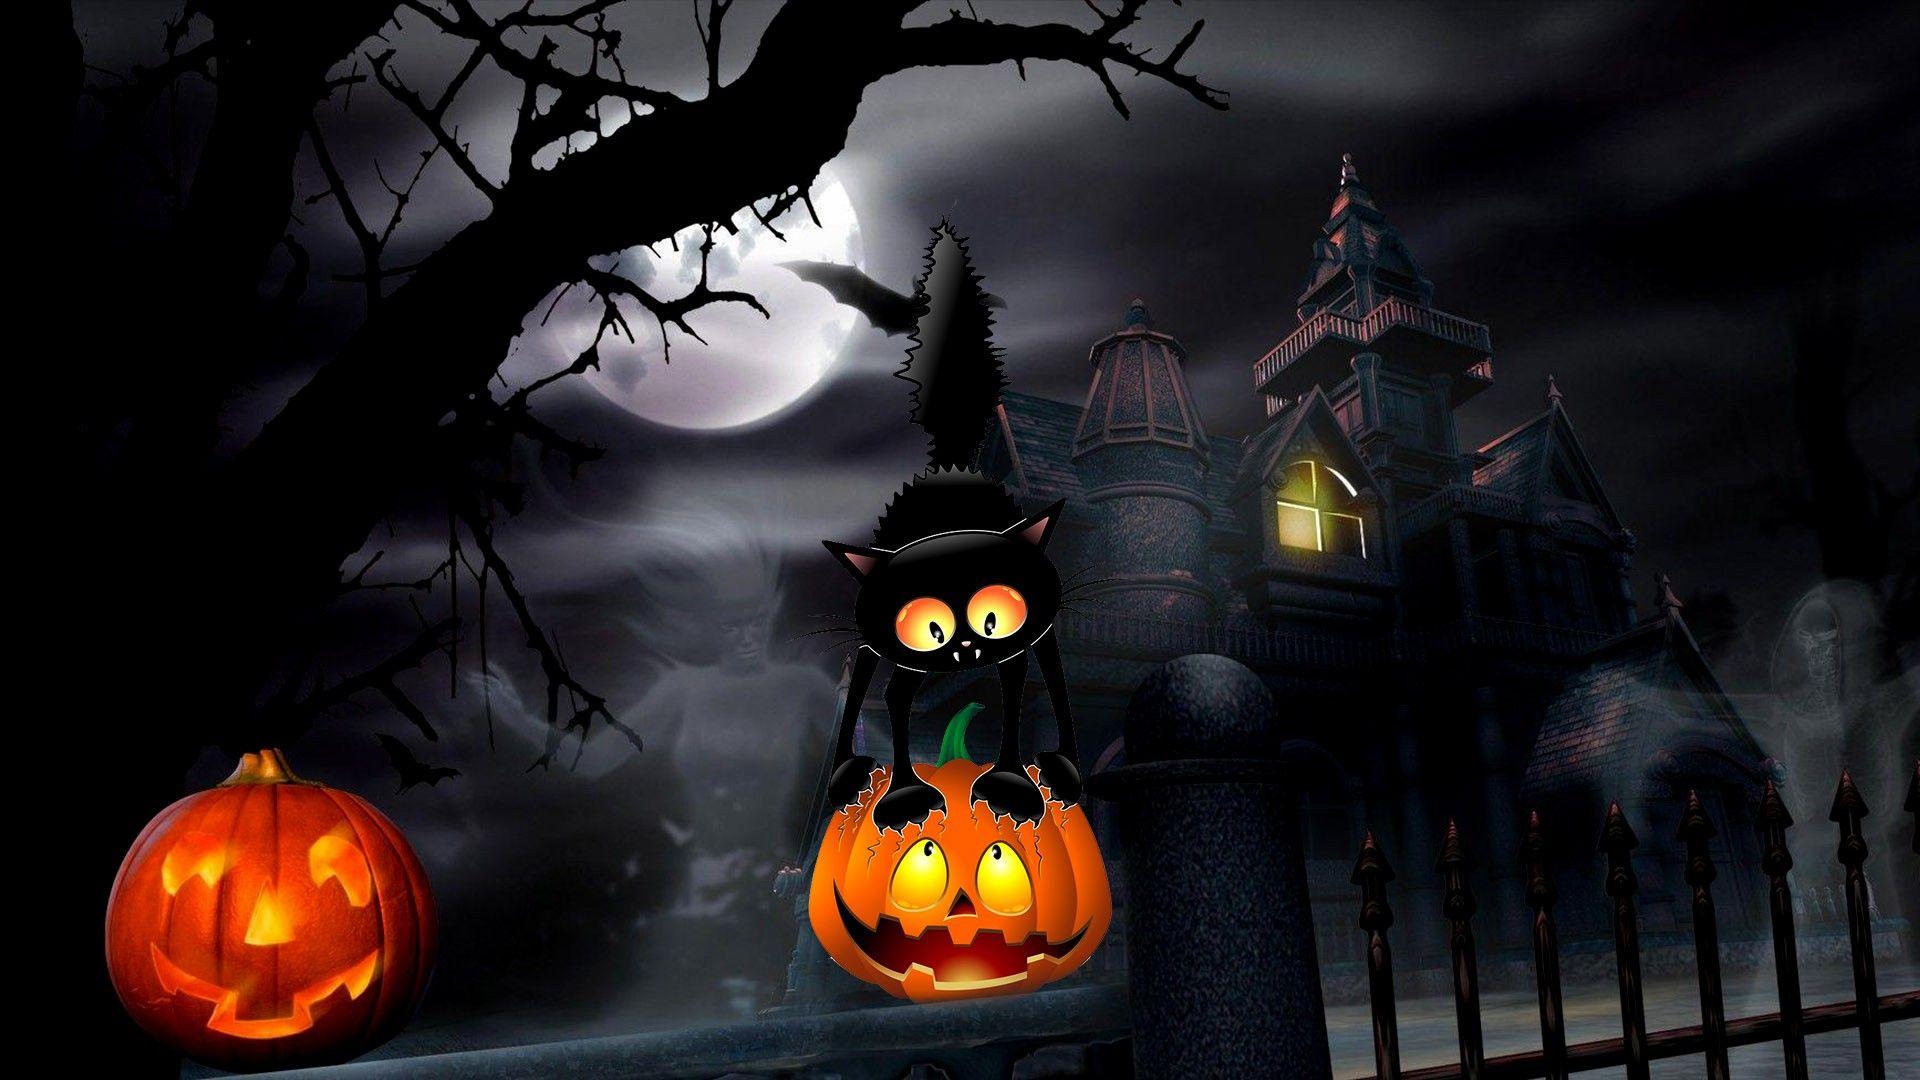 Download Celebrate Halloween with a black cat spirit Wallpaper  Wallpapers com